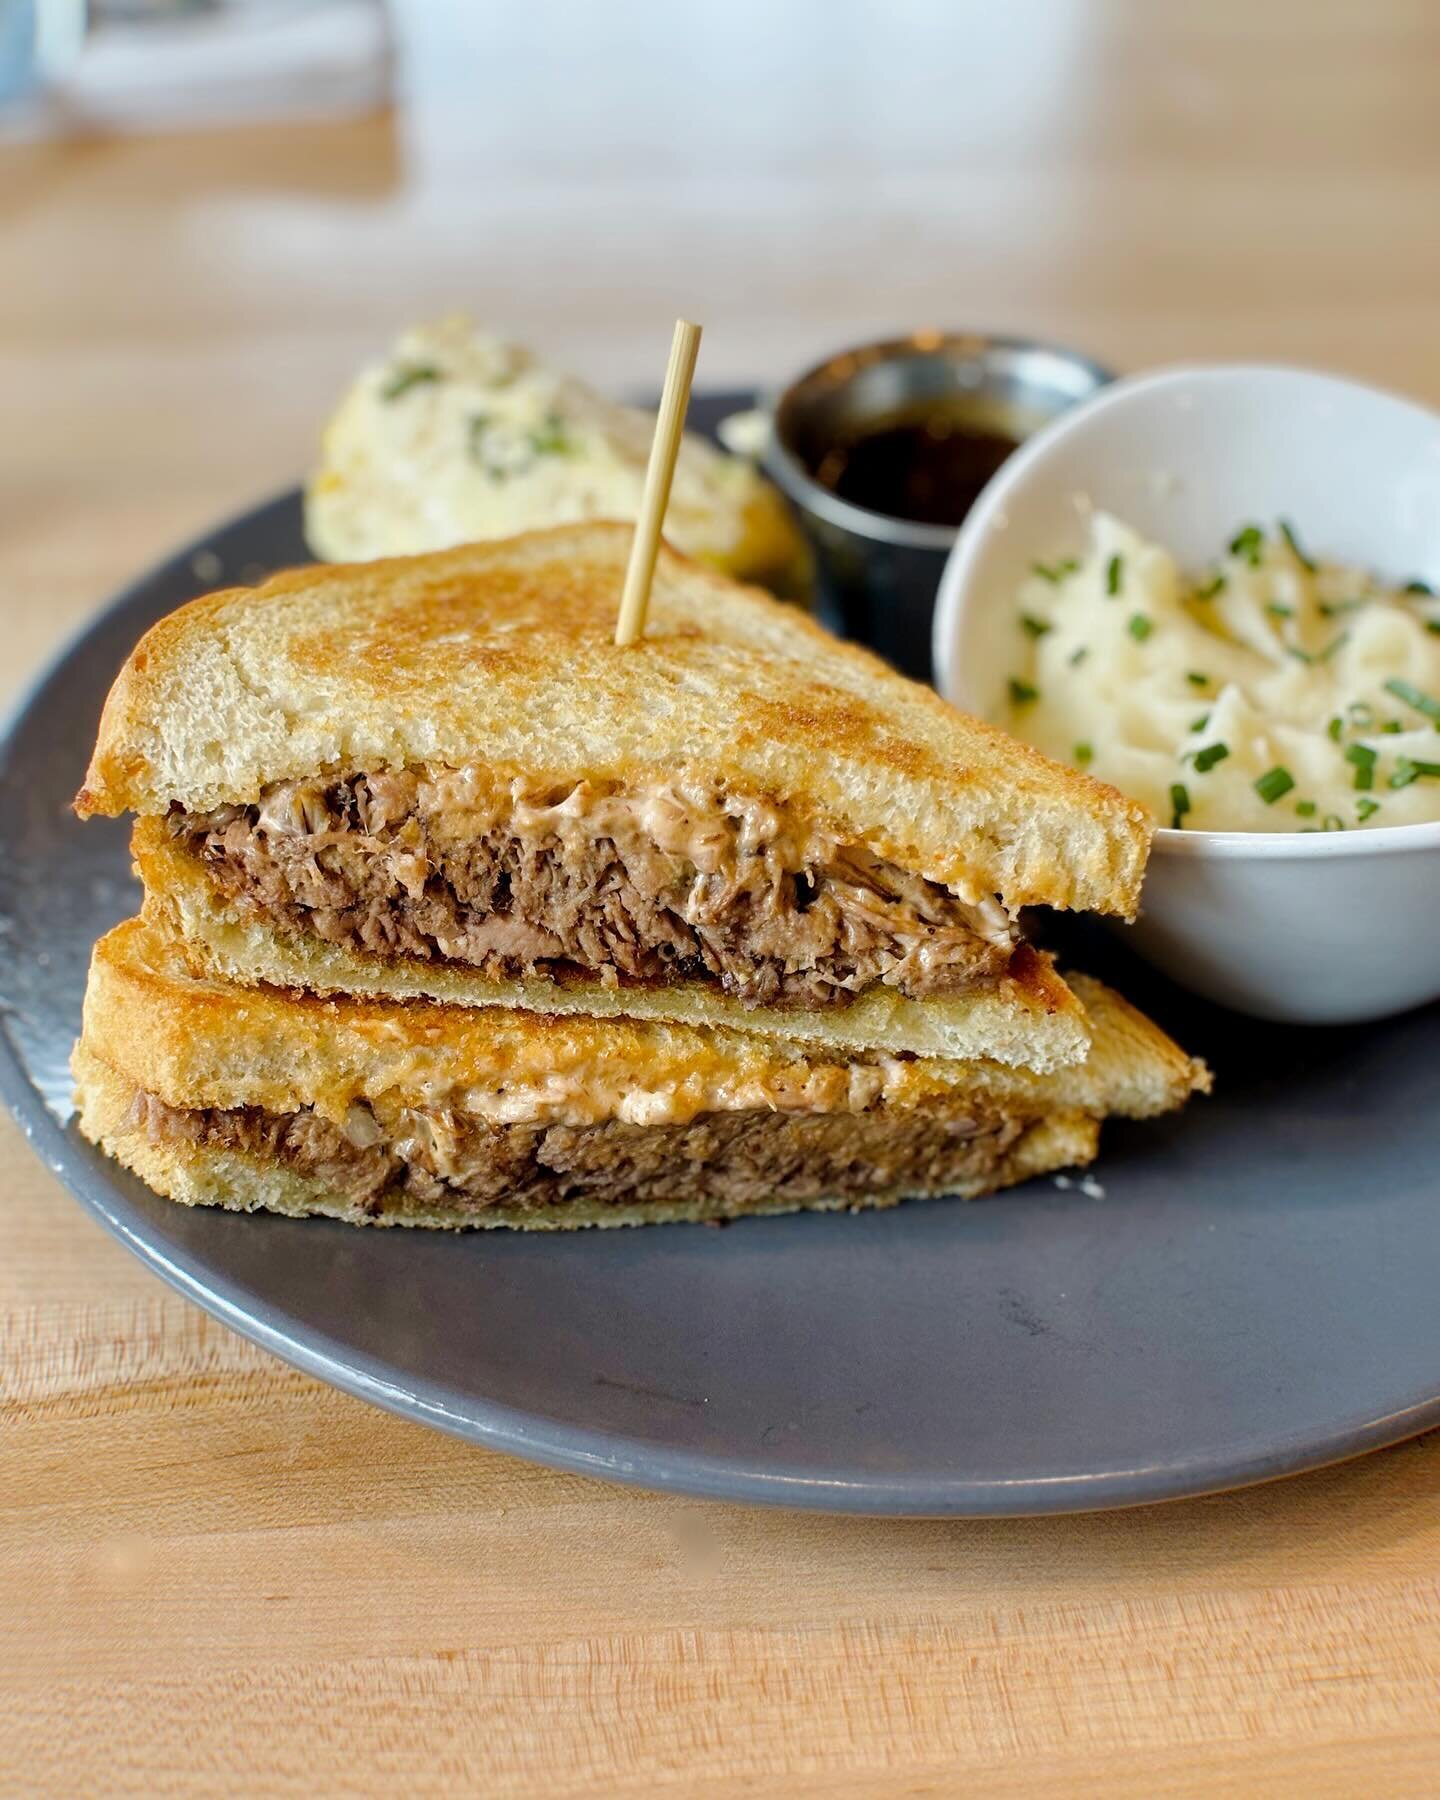 🍀🌈 Unlock the treasure at Scout&rsquo;s this St. Patty&rsquo;s Day with our Pot O&rsquo; Gold Special! Indulge in our mouthwatering Pulled Corned Beef Sandwich, topped with spicy Russian dressing, served with your choice of one side and savory Elot